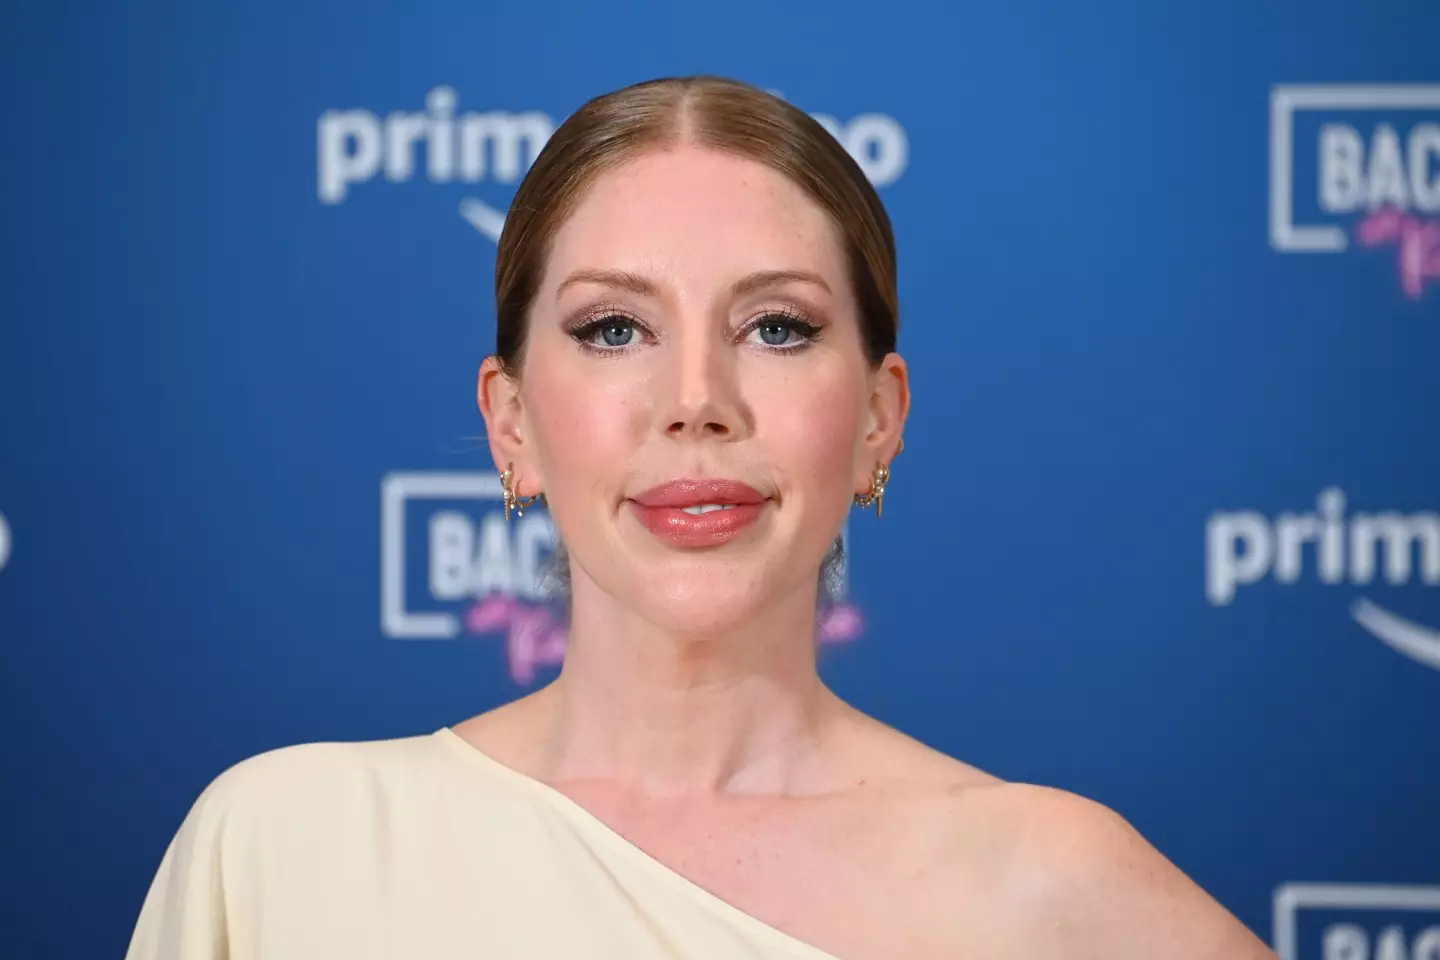 Katherine Ryan hopes her comments reach young women.